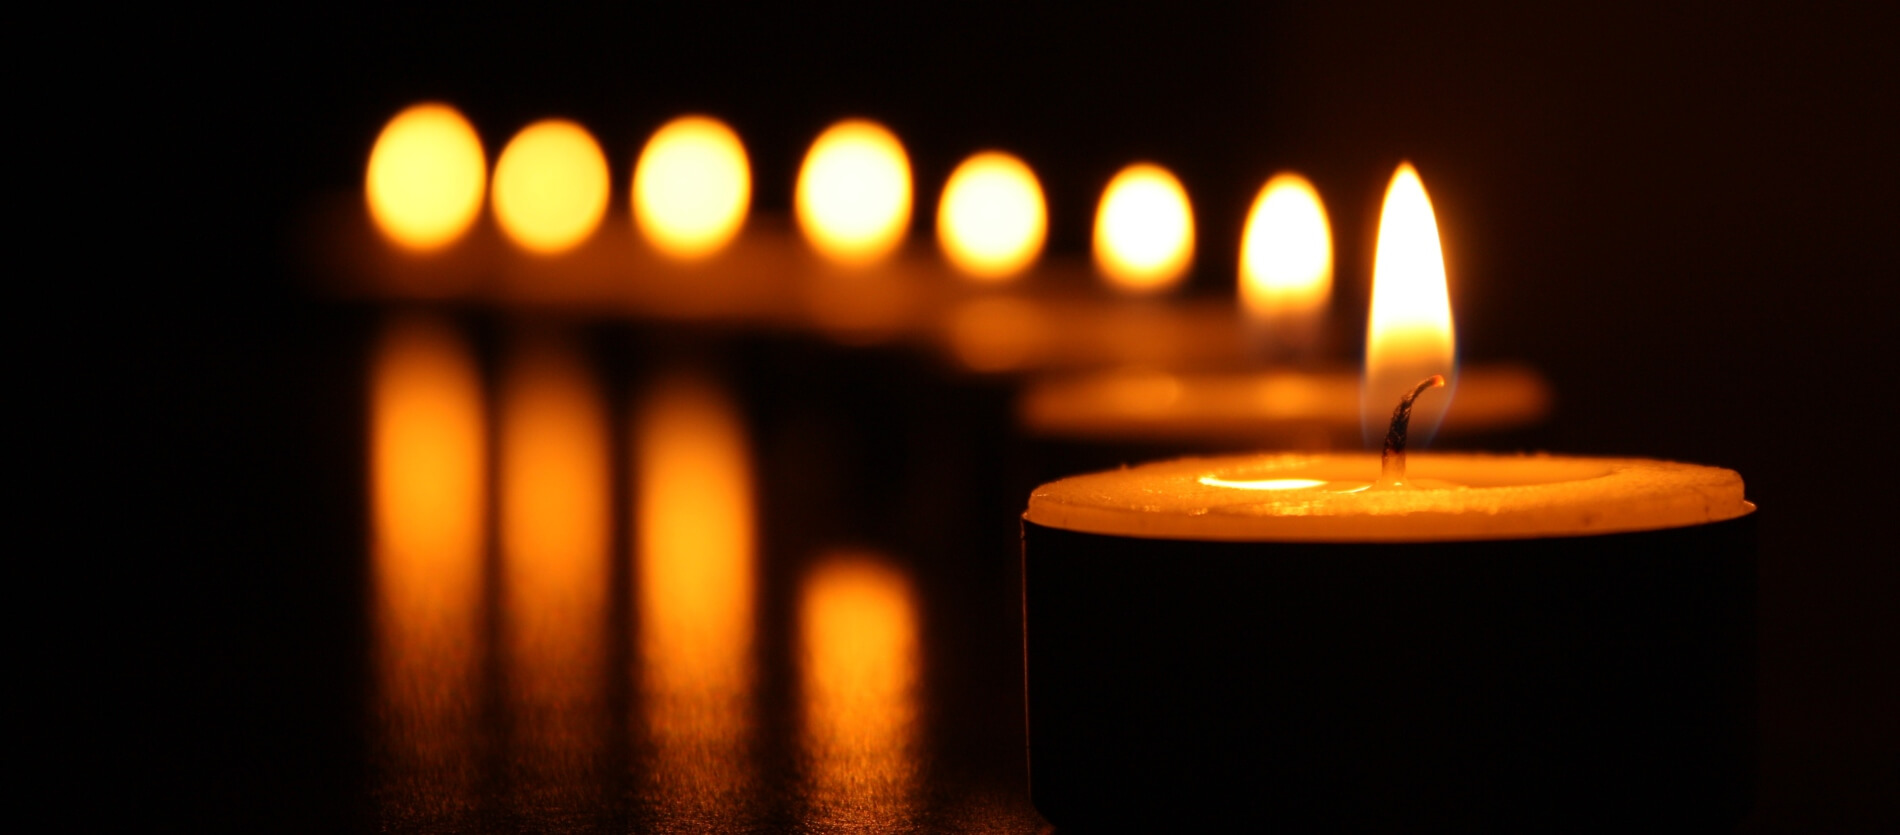 Lit candles with the first candle in focus and other remaining candles blurred in the background in a vertical line